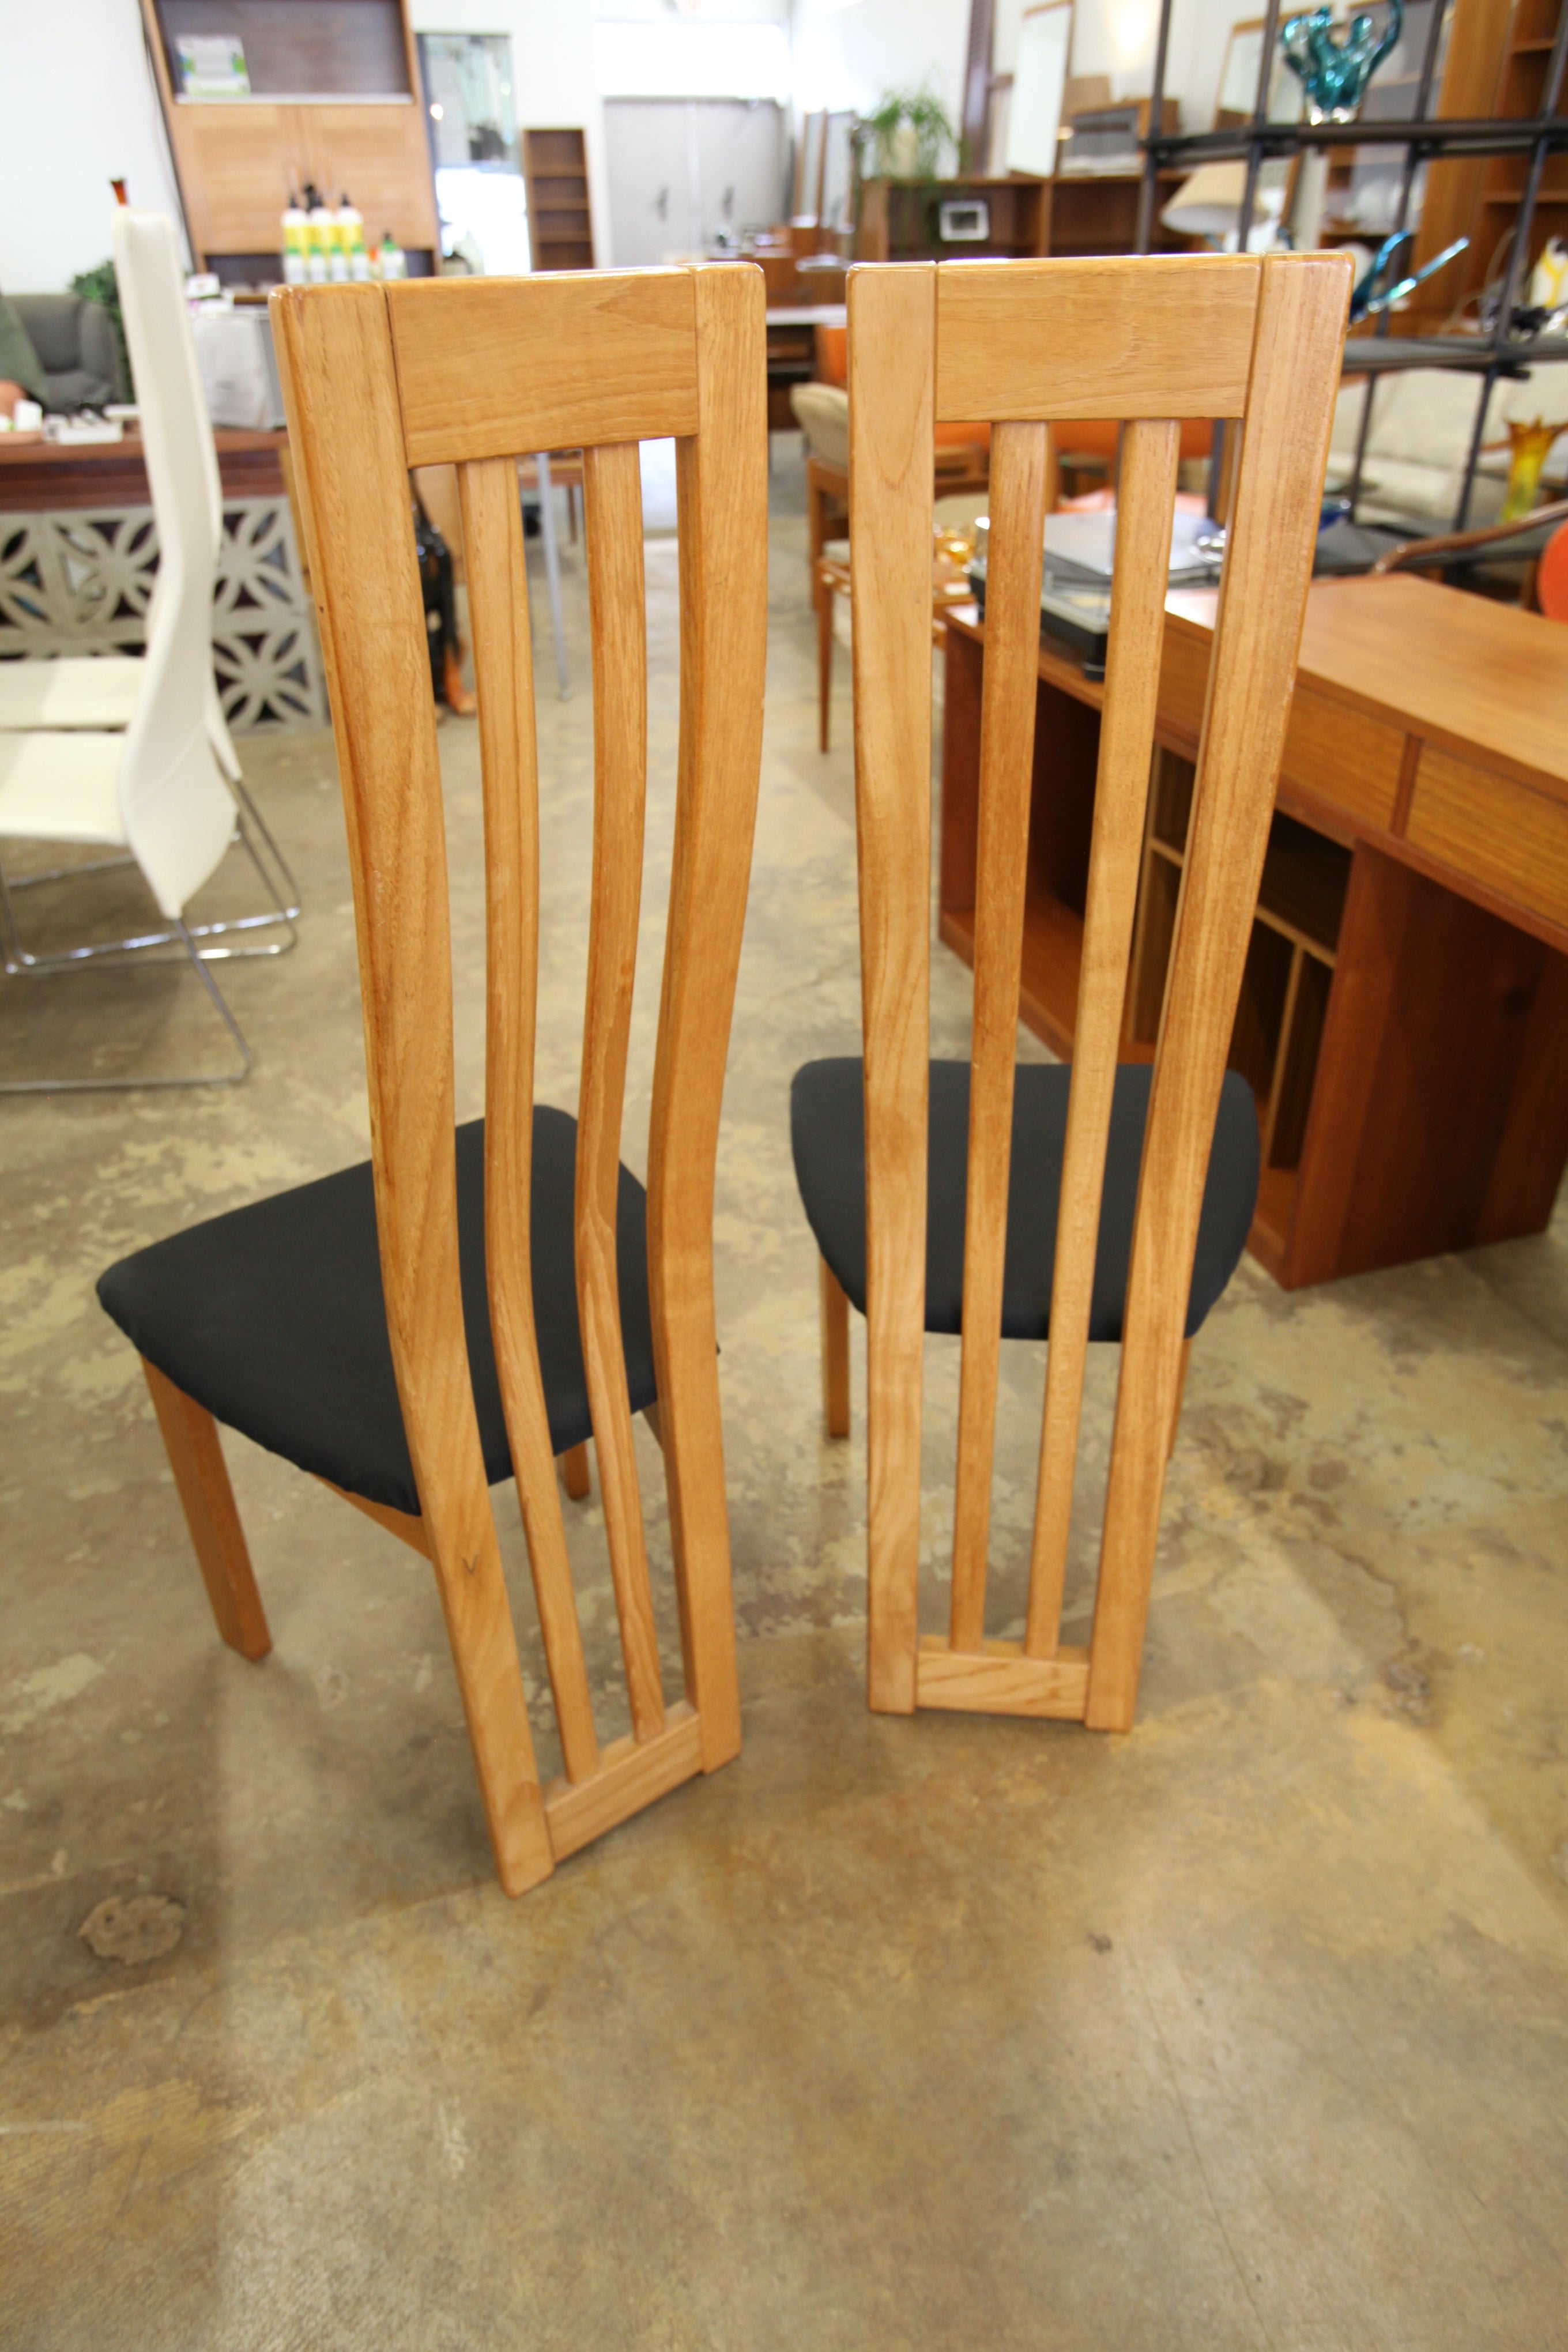 Set of 6 Vintage Teak High Back Dining Chairs  (17"W x 20"D x 45.25"H)